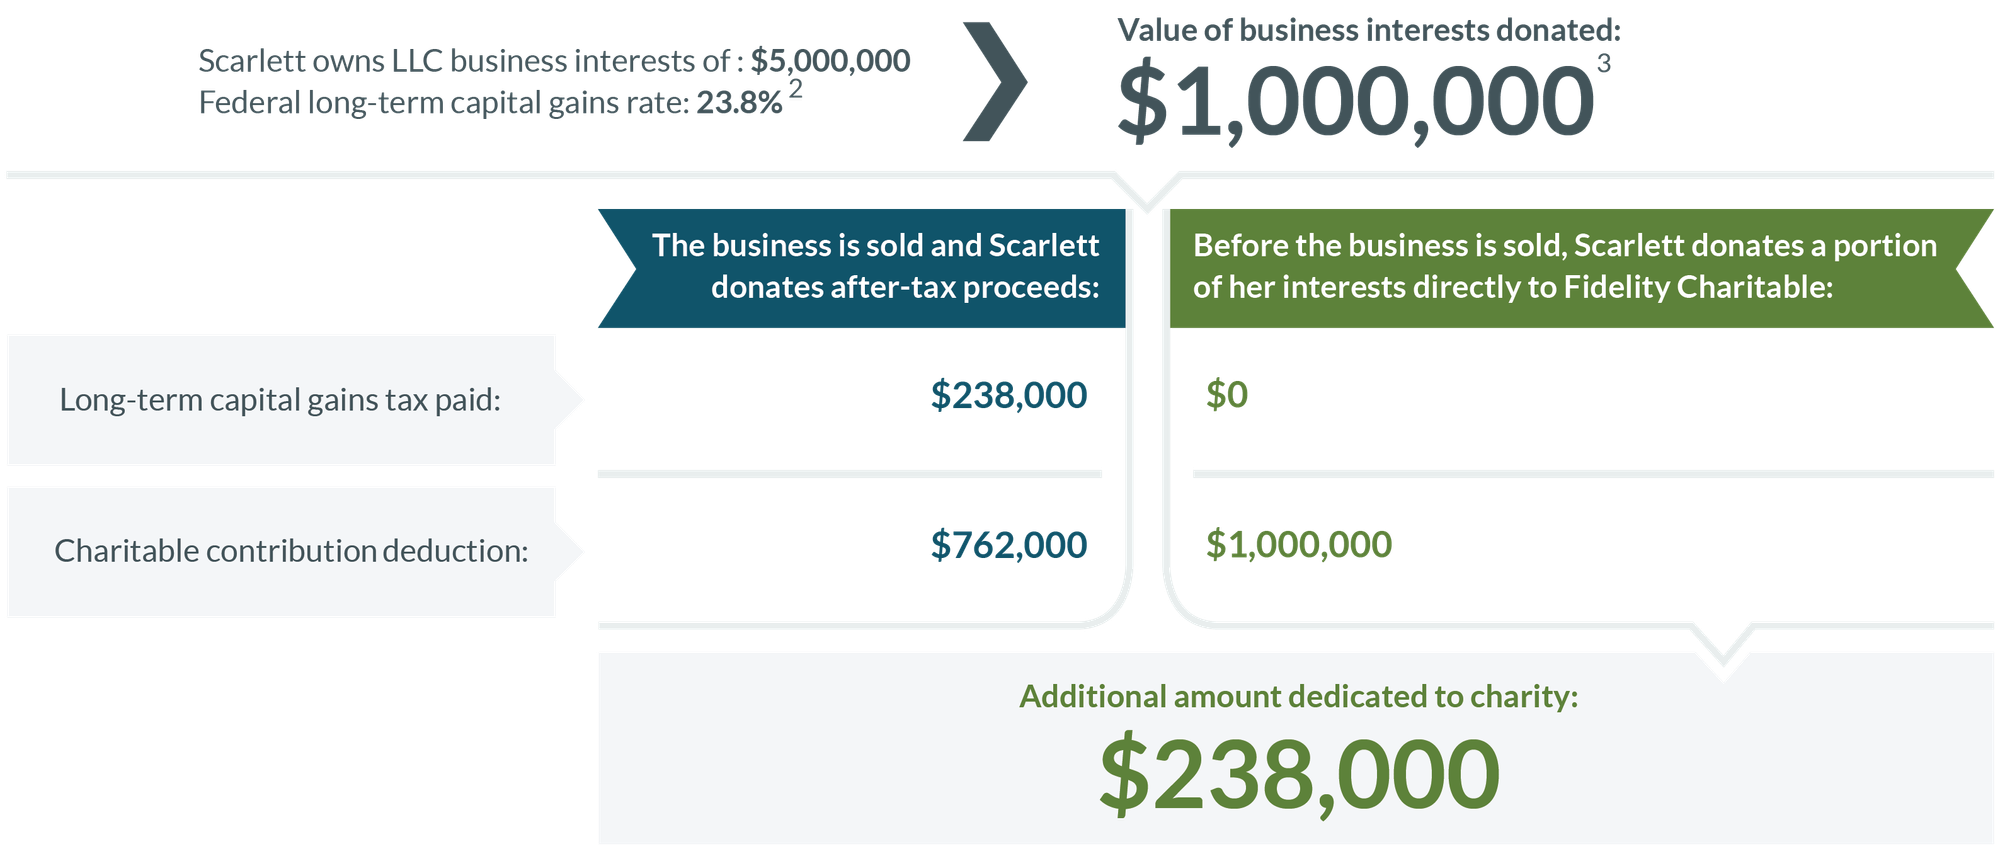 A comparison of donating a portion of business interests directly to charity versus donating the after-tax proceeds.